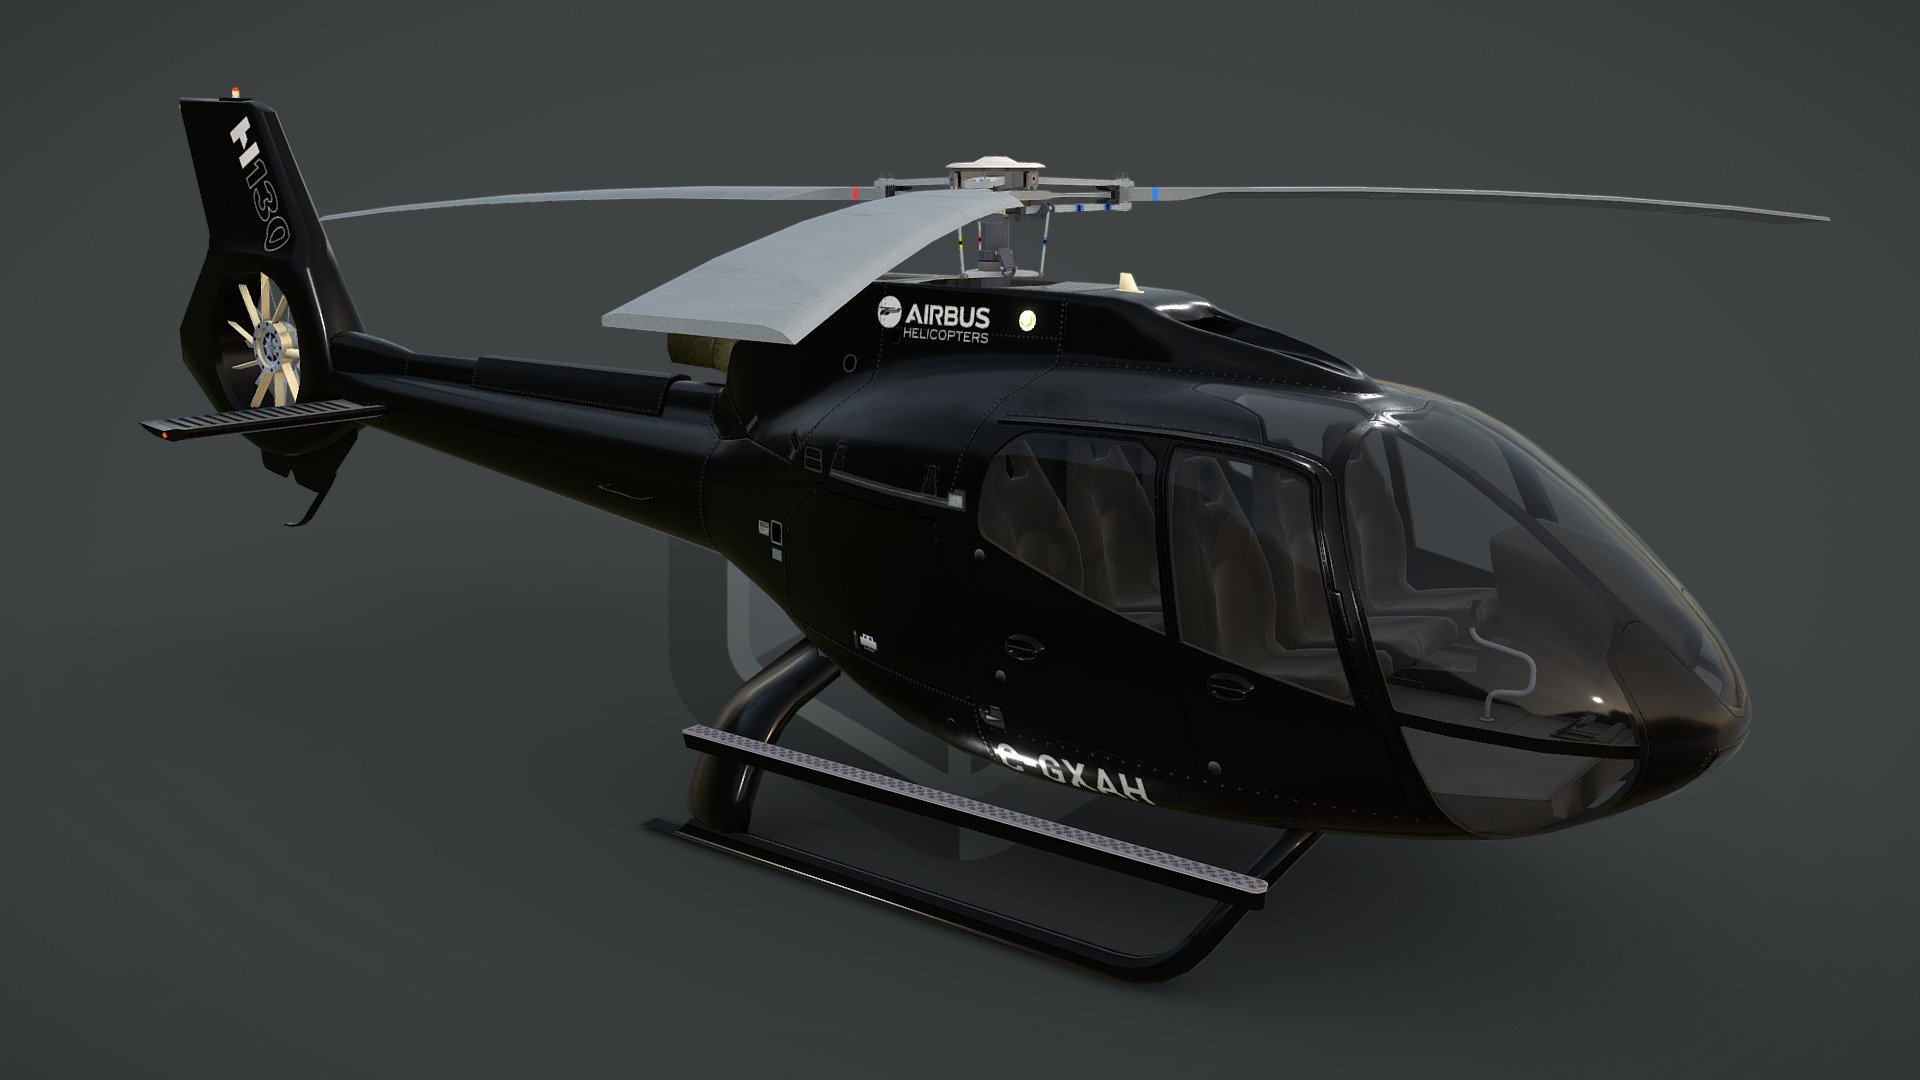 game ready, realtime optimized game asset

unique livery and branding

both PBR workflows ready

LOD0 is HQ lowpoly with bended top rotor, all lights objects and interior

LOD0 19710 tris, LOD1 10462 tris, LOD2 7388 tris, LOD3 5990 tris

100% triangulated and 100% unwrapped non-overlapping

5 x uv layouts, body, HQ rotors, LQ rotors, interior, lights

made using blueprints, real world scale meters

all rotors detached and animable in each LOD with properly placed pivots for flawless animations

hideable capsule built interior that fits perfectly the body

interior is simple but a great basis for further elaboration

big textures pack with native 4096 x 4096 px textures for body, rotors, interior

LOD3 rotors have own textures with blades on alpha channel

light objects have own, small, textures, and contain an emission map

pack contains native .max scene, created in 3dsmax 2014

pack contains clean and flawless FBX and OBJ files

each LOD and all LOD together exported in each file format
 - Black Helicopter EC130-H130 Livery 25 - Buy Royalty Free 3D model by CGAmp 3d model